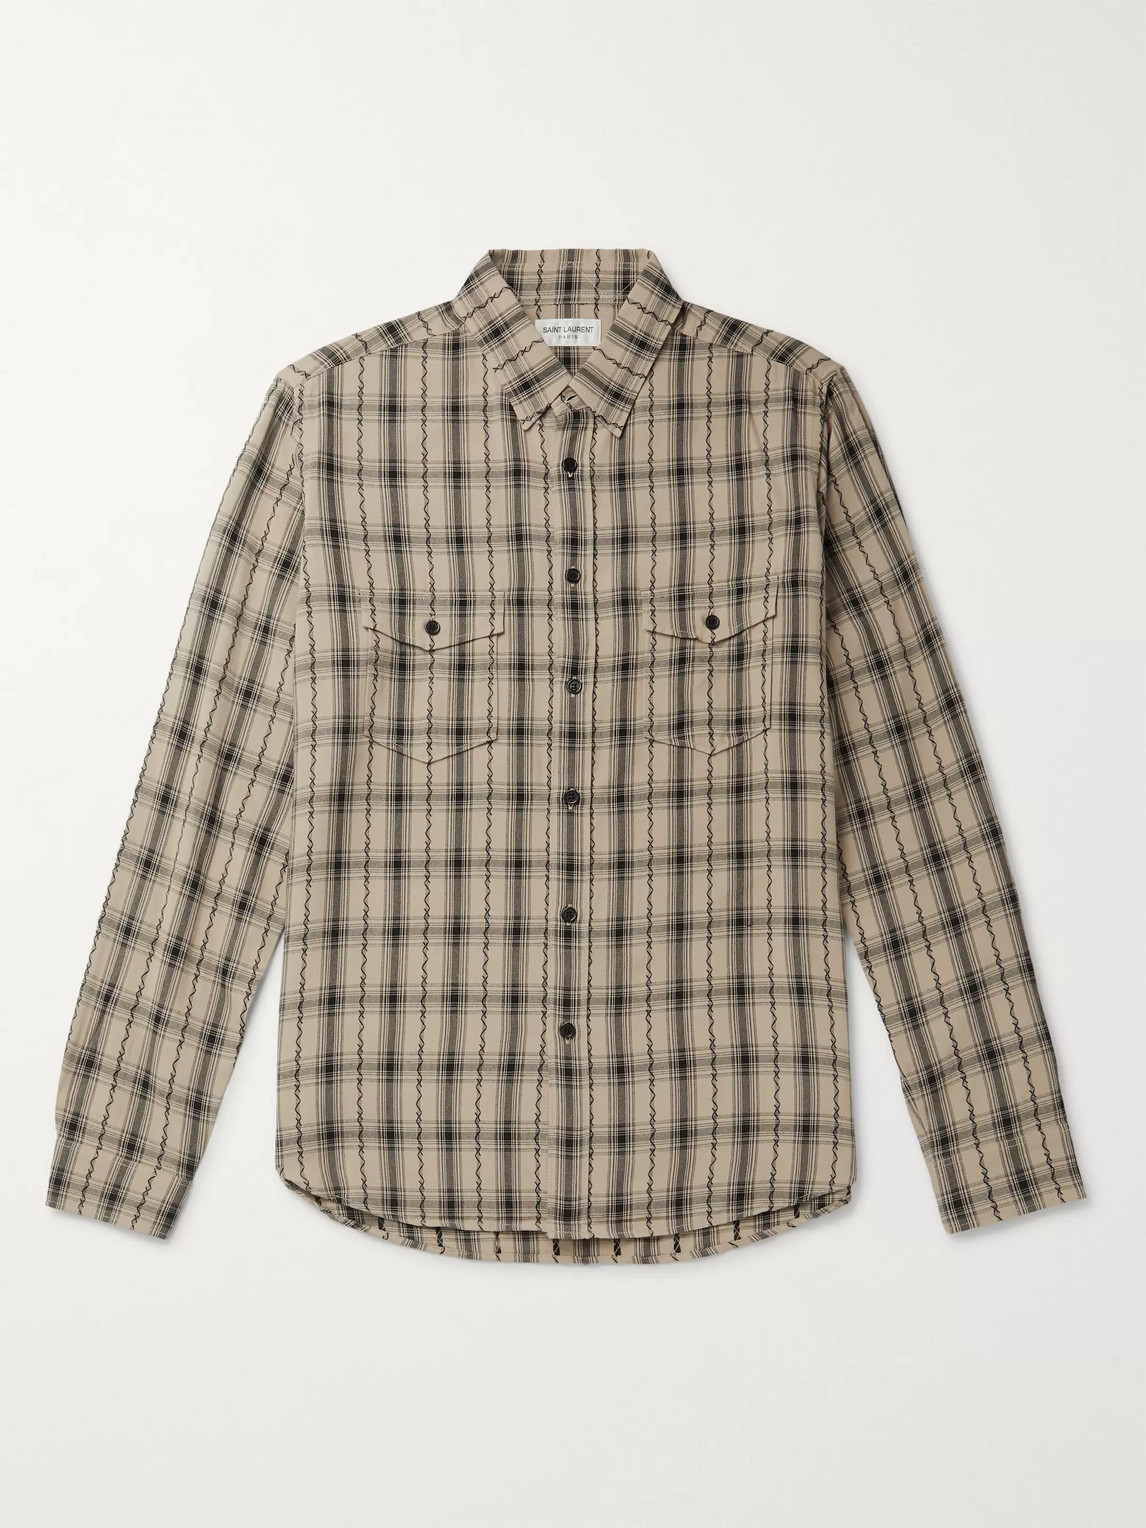 SAINT LAURENT OVERSIZED EMBROIDERED CHECKED WOVEN SHIRT